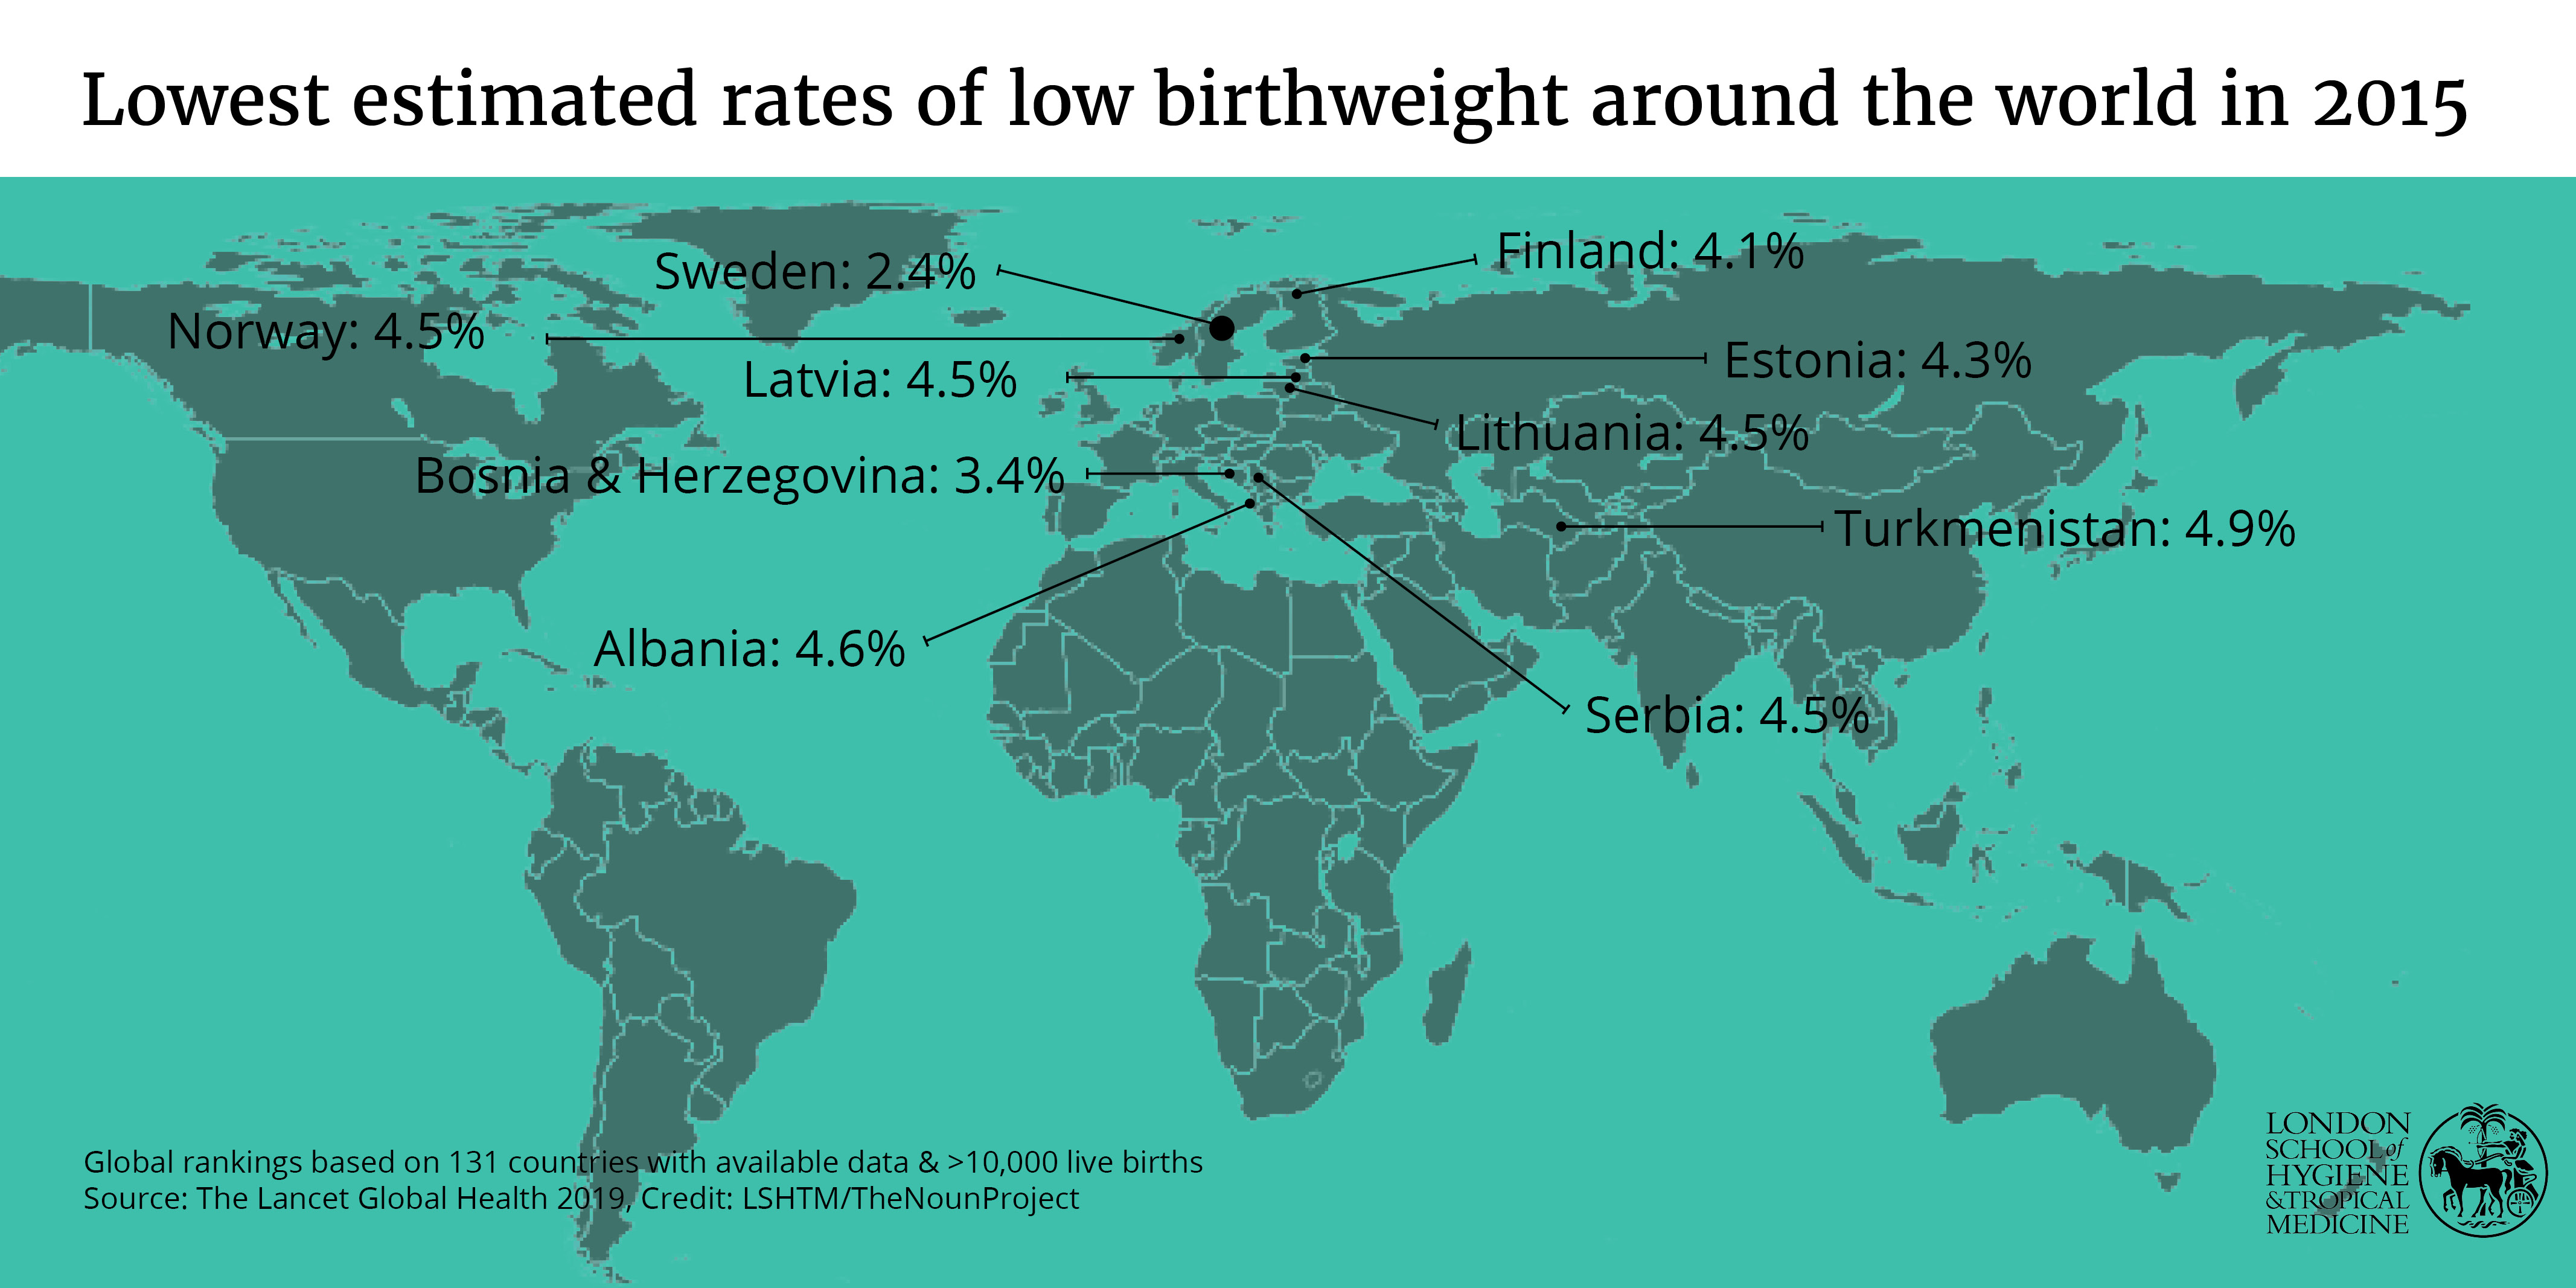 Lowest estimated rates of low birthweight around the world in 2015